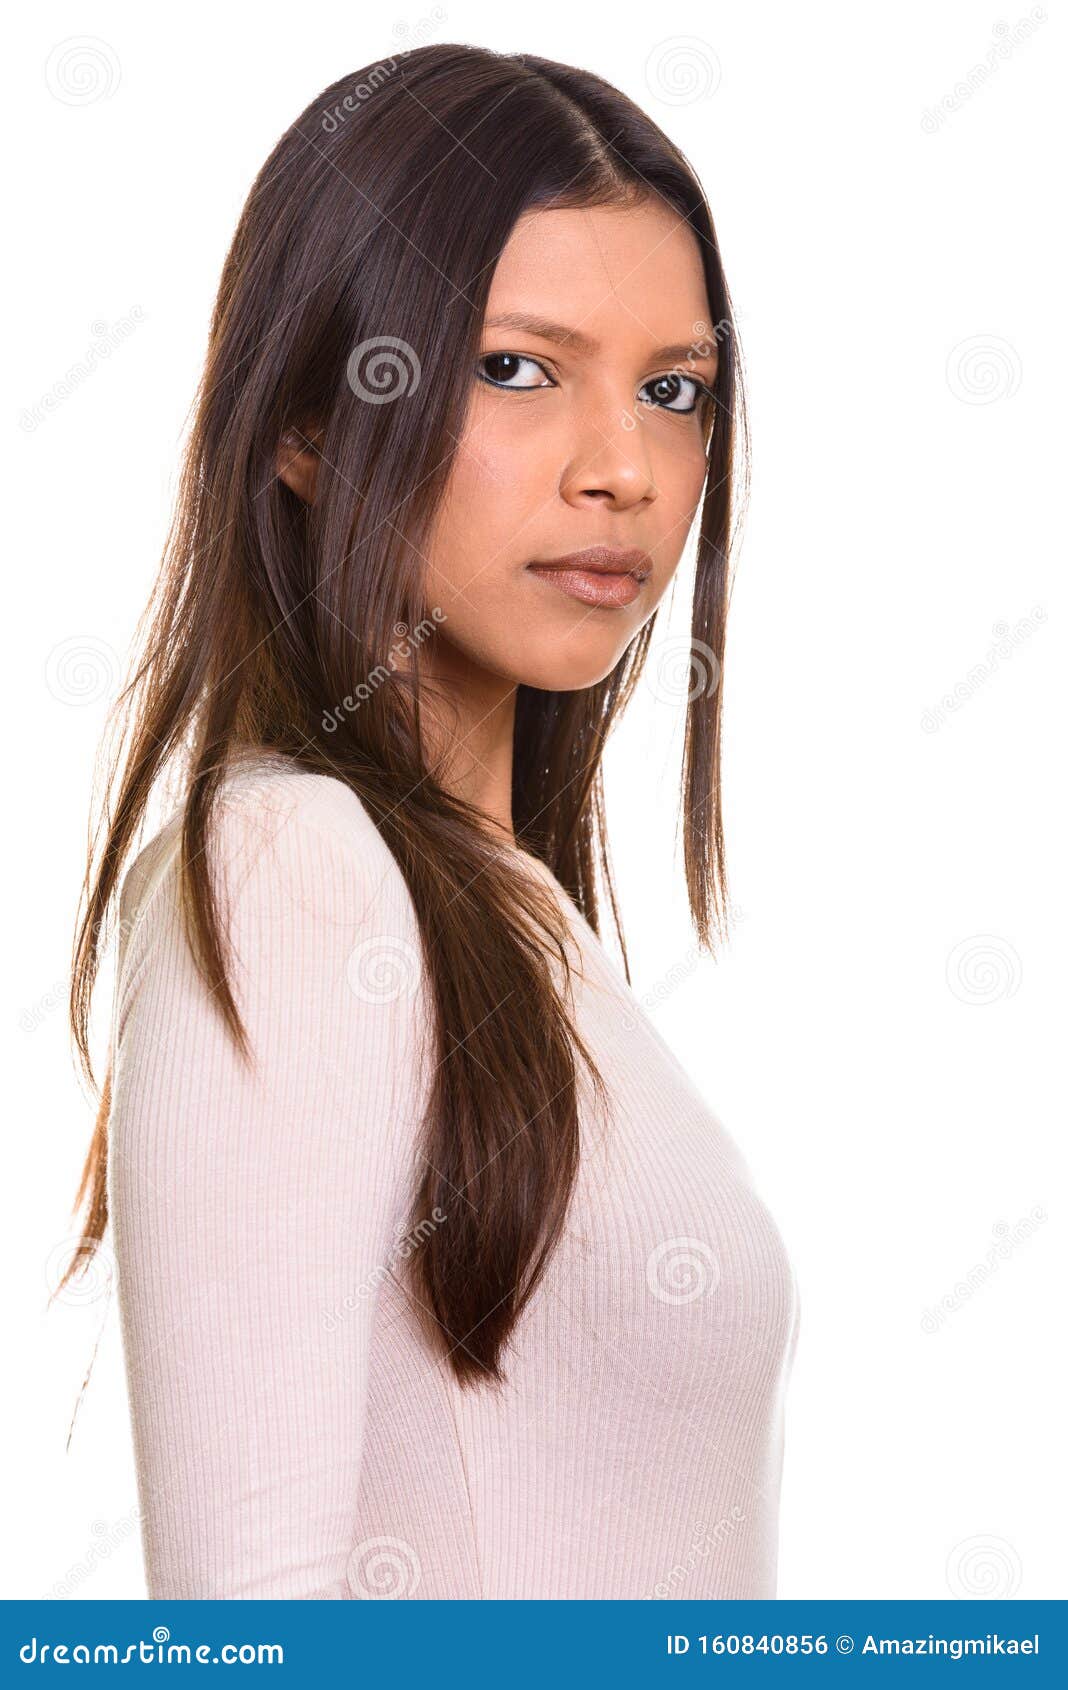 https://thumbs.dreamstime.com/z/close-up-young-beautiful-brazilian-woman-close-up-young-beautiful-brazilian-woman-isolated-against-white-background-160840856.jpg